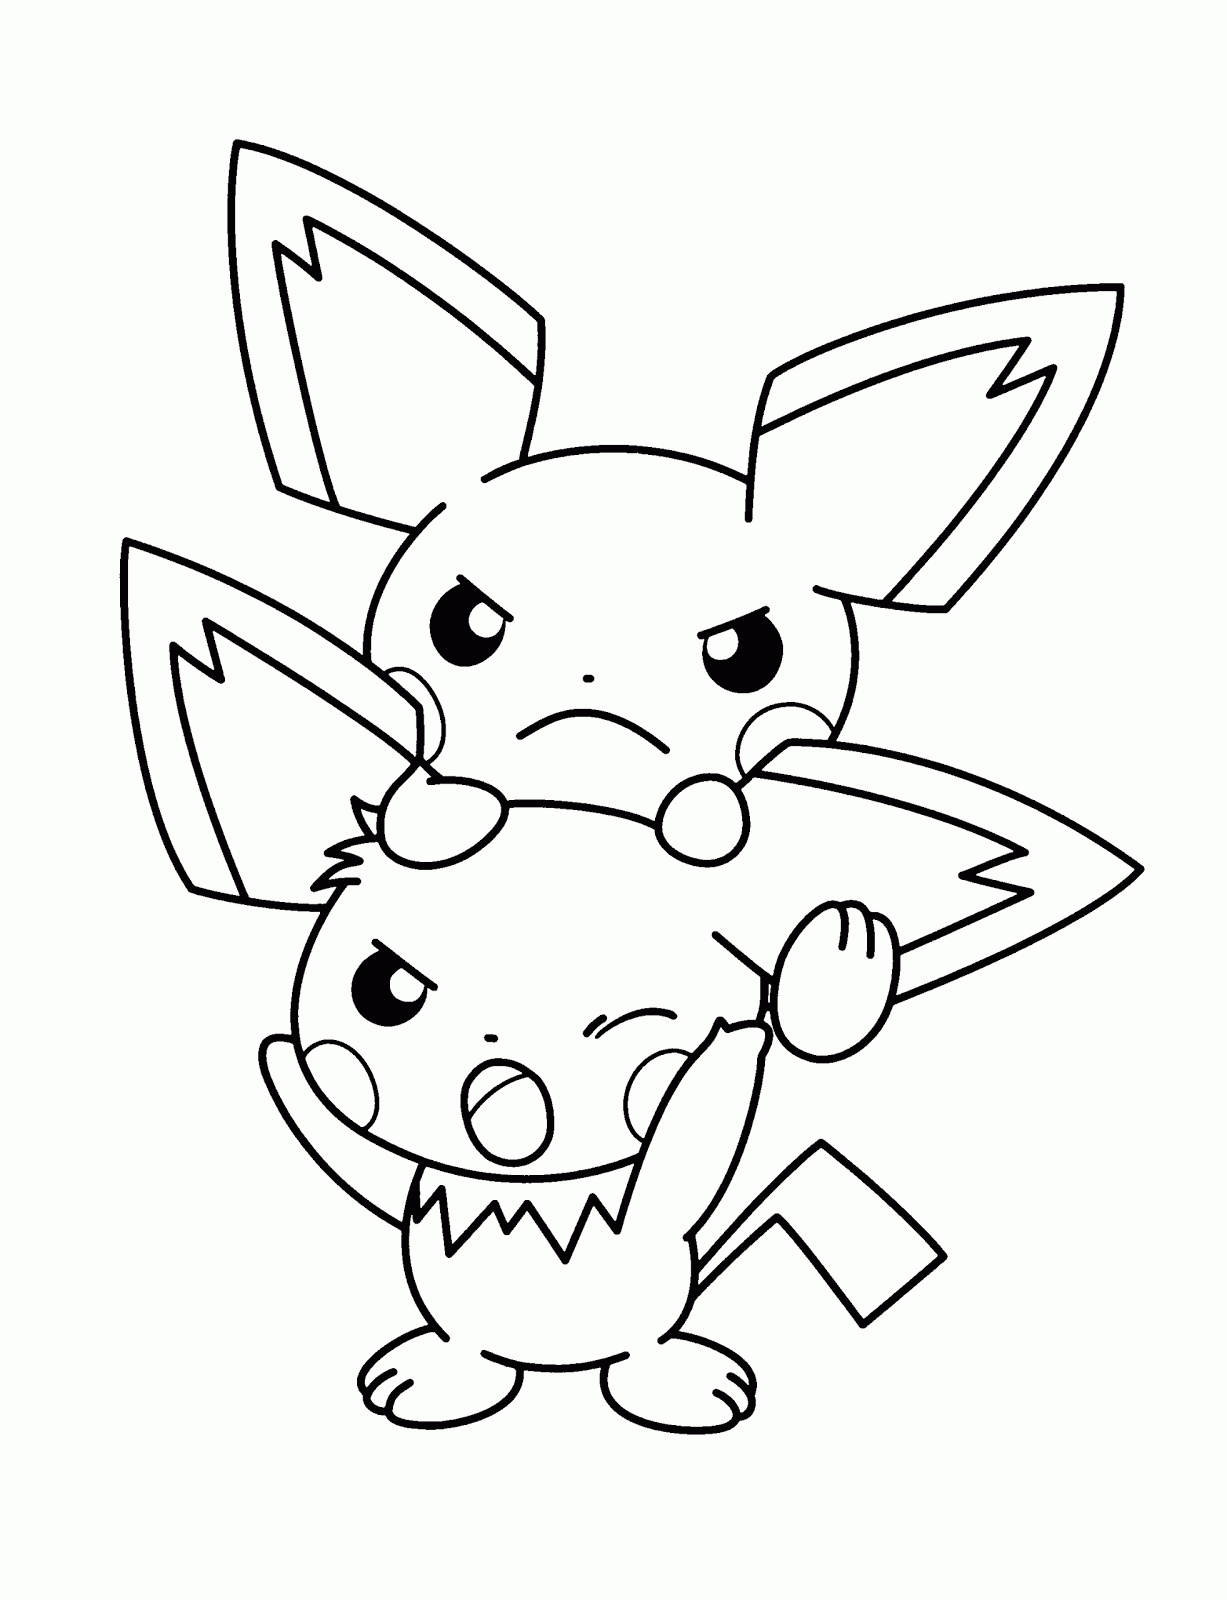 pokemon printable colouring pages pokemon coloring pages quot pikachu printable pokemon colouring pages 